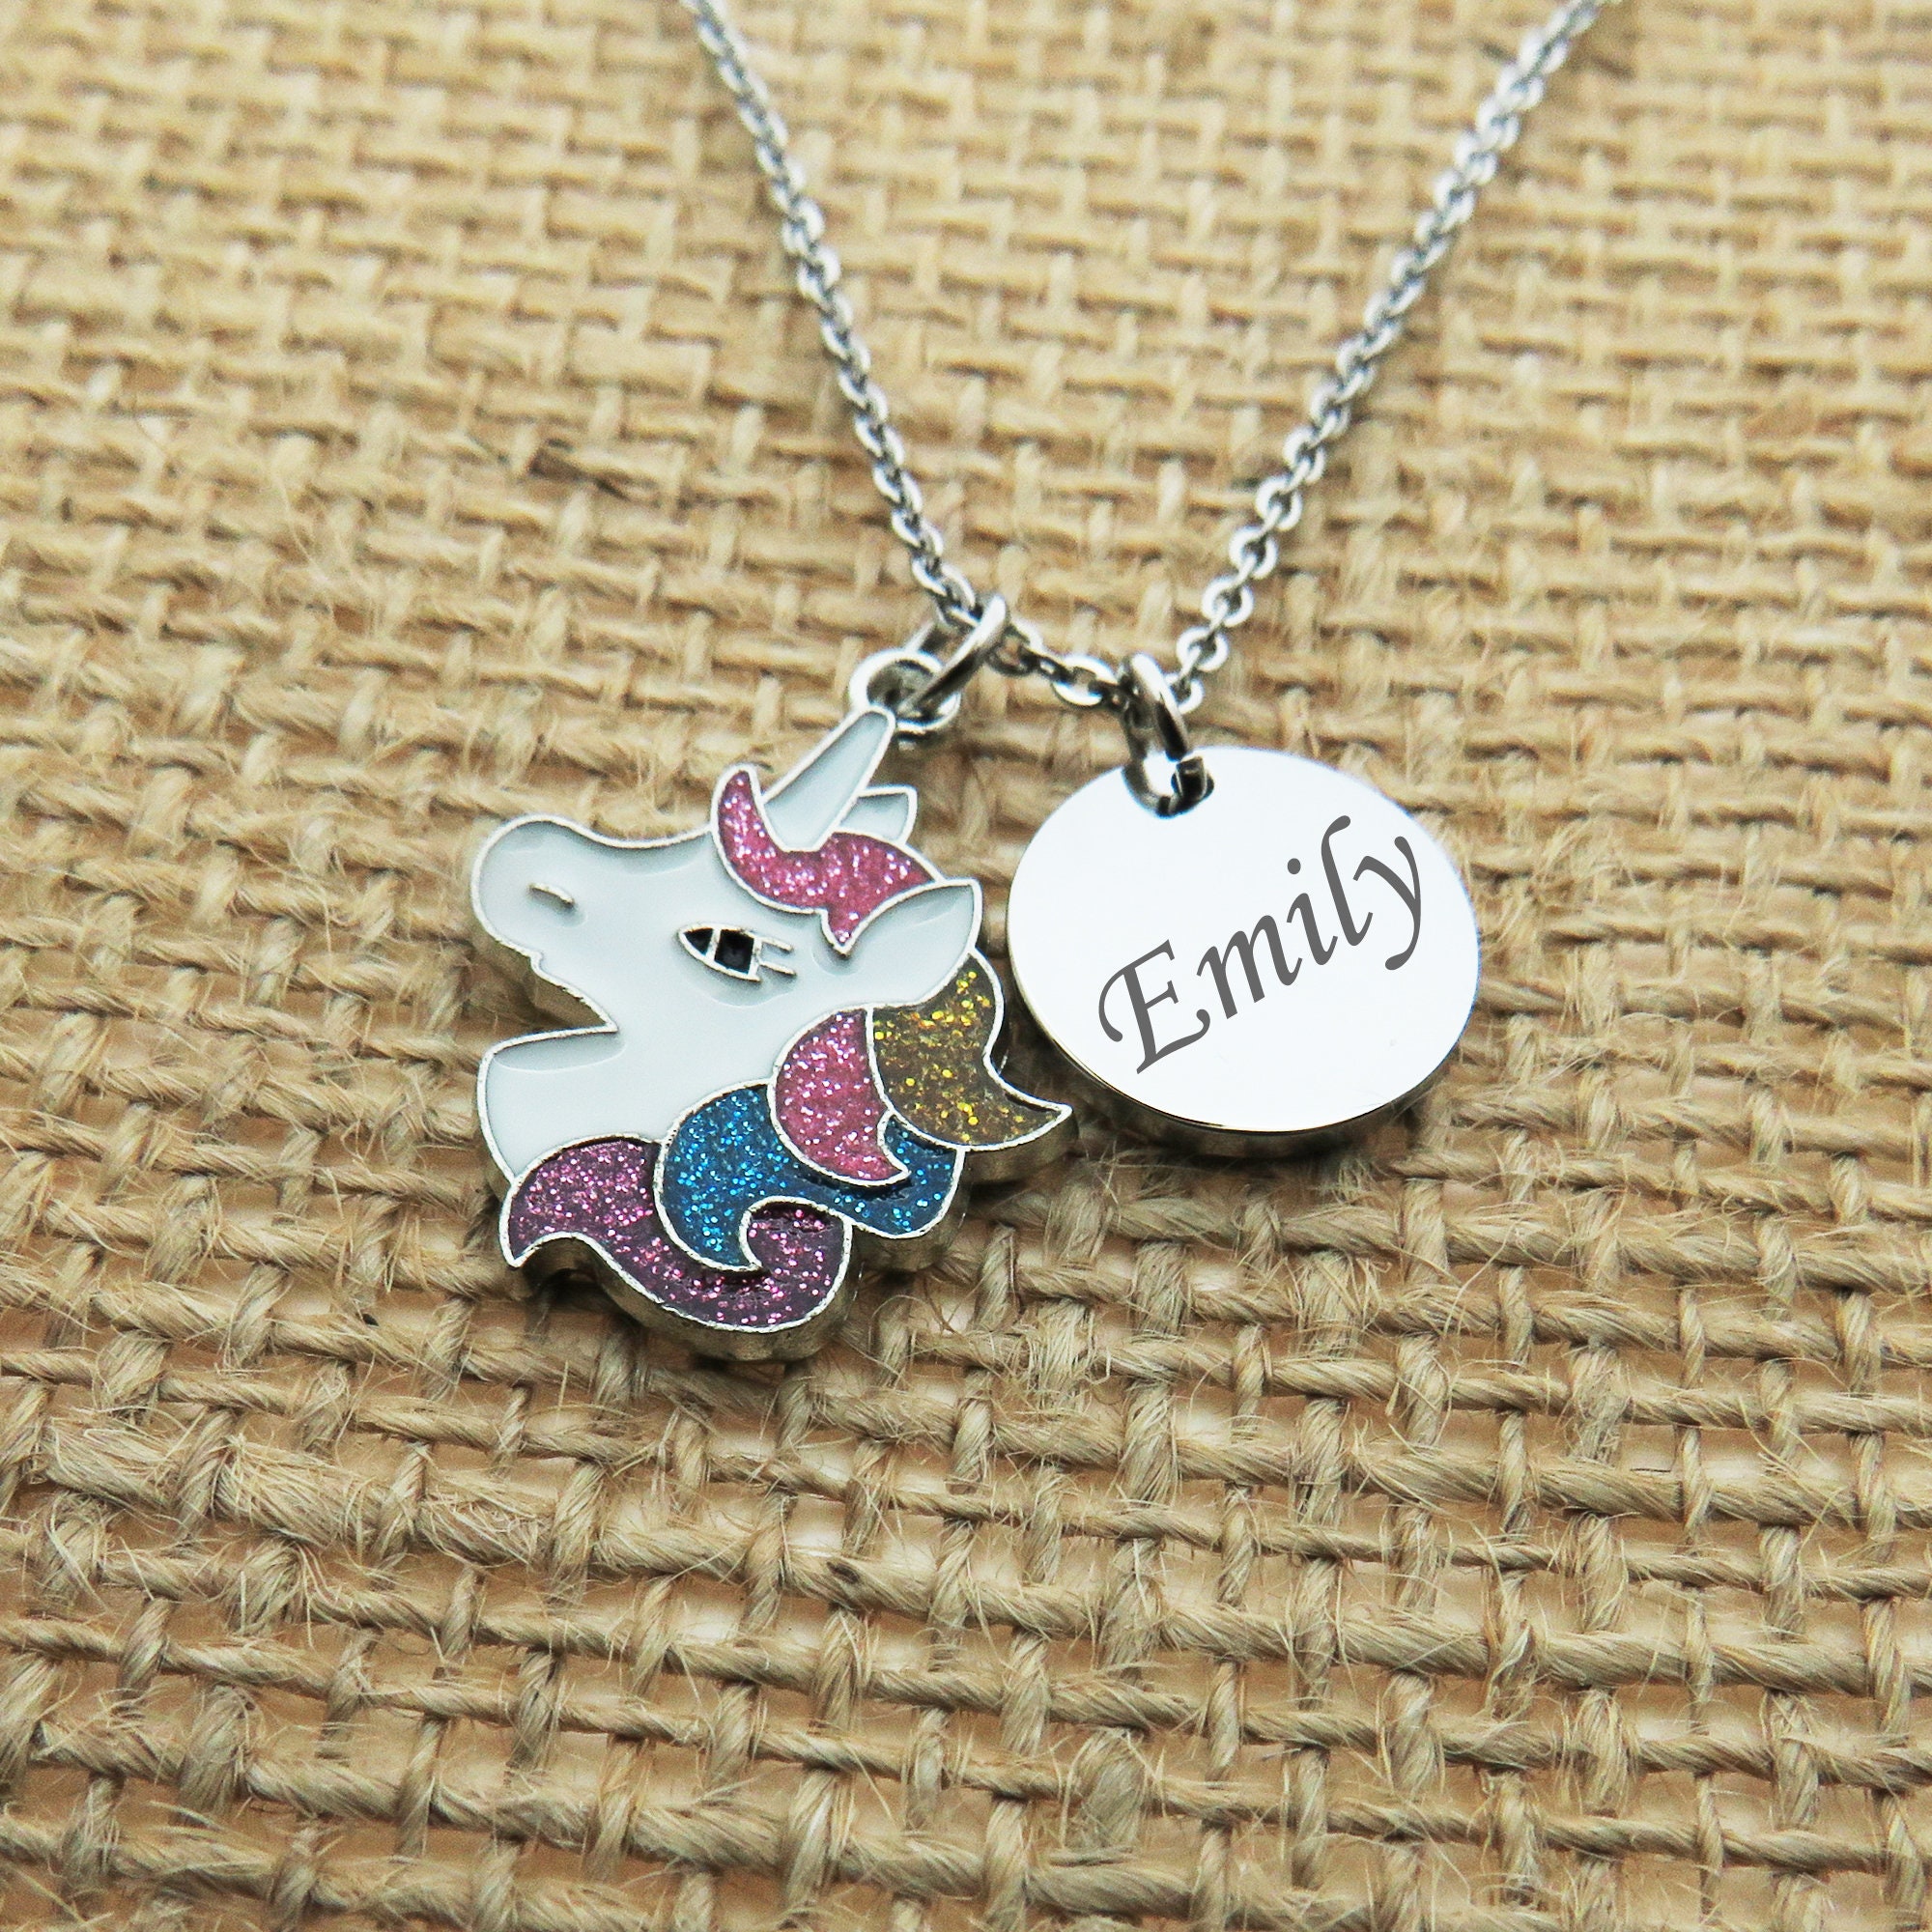 TINGN Unicorns Gifts for Girls Necklaces Rose Gold Plated Heart Unicorn  Necklaces for Women Girls Initial Necklaces for Women Girls Unicorn Jewelry  Gifts for Girls 